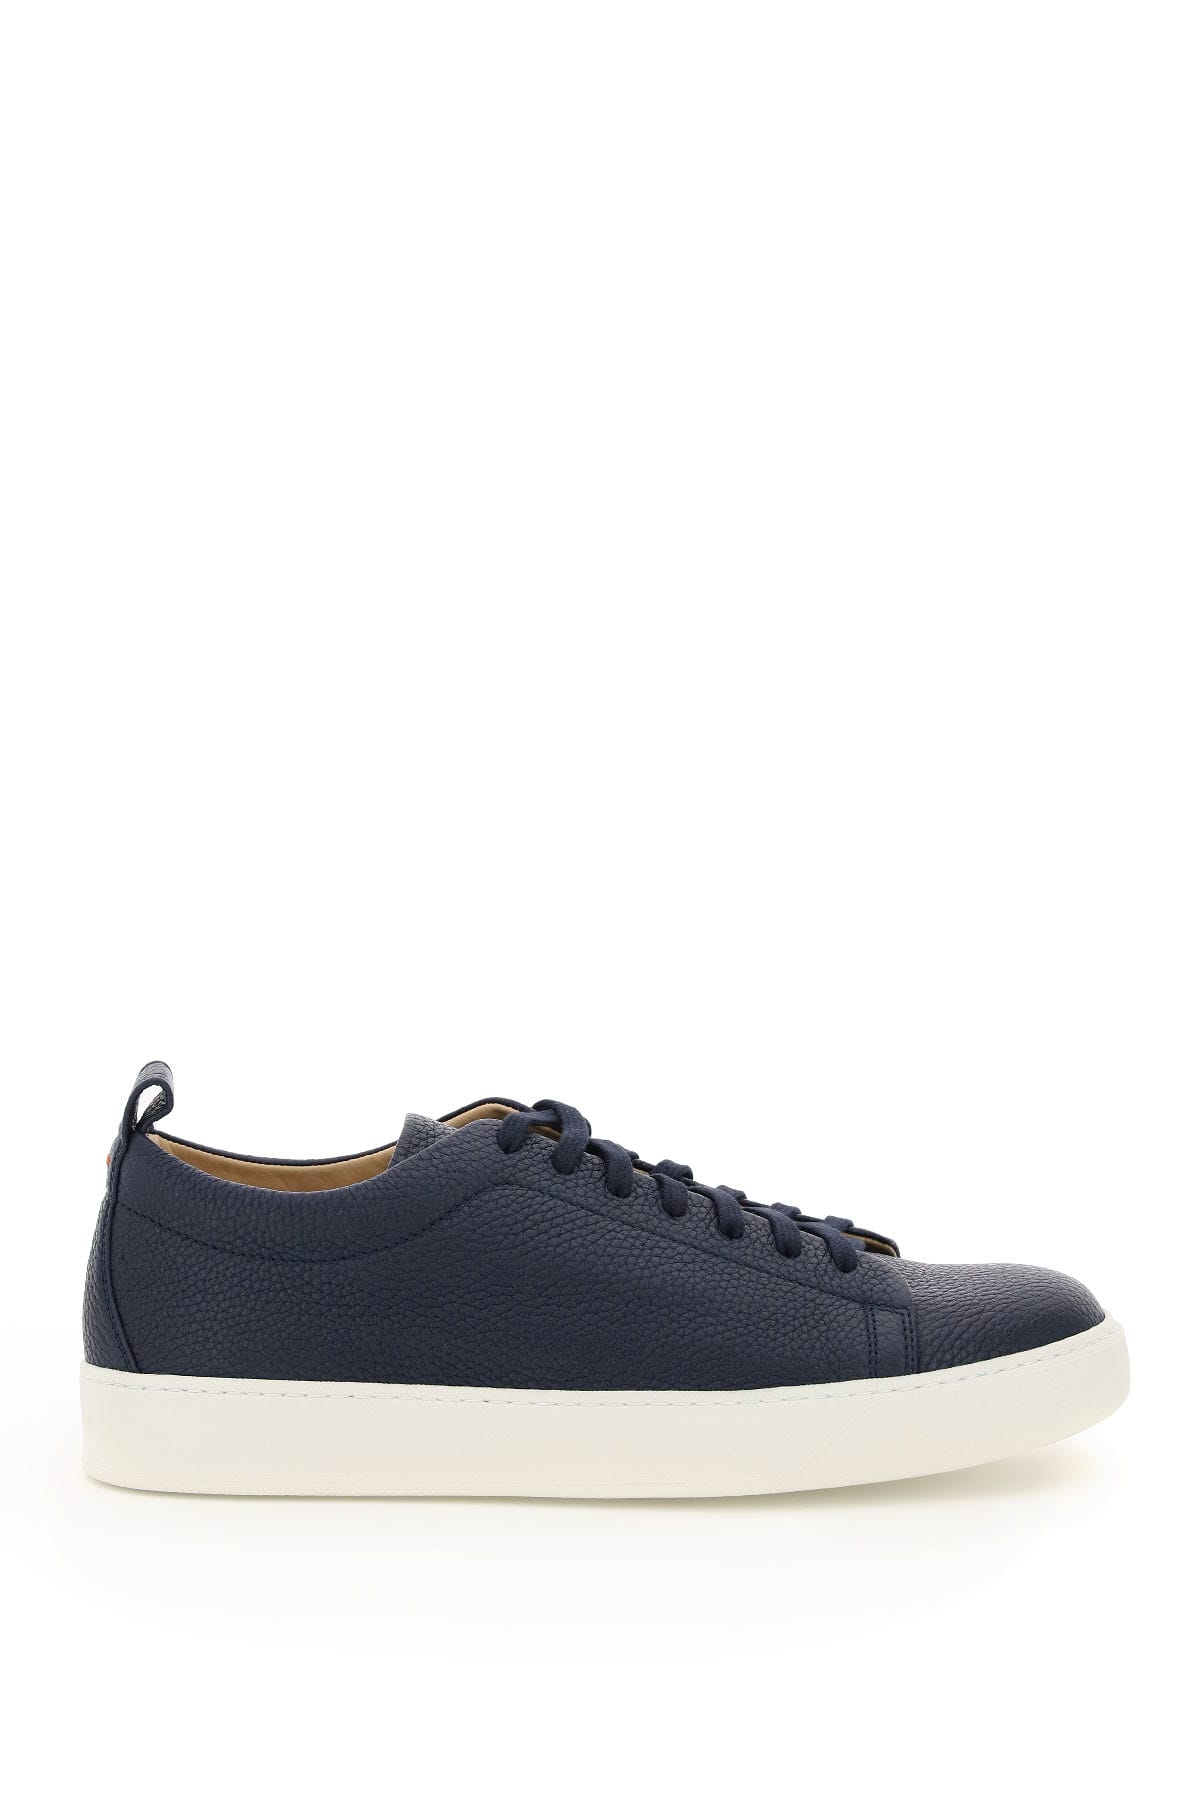 Henderson Baracco Connor Leather Sneakers In Blu (blue)